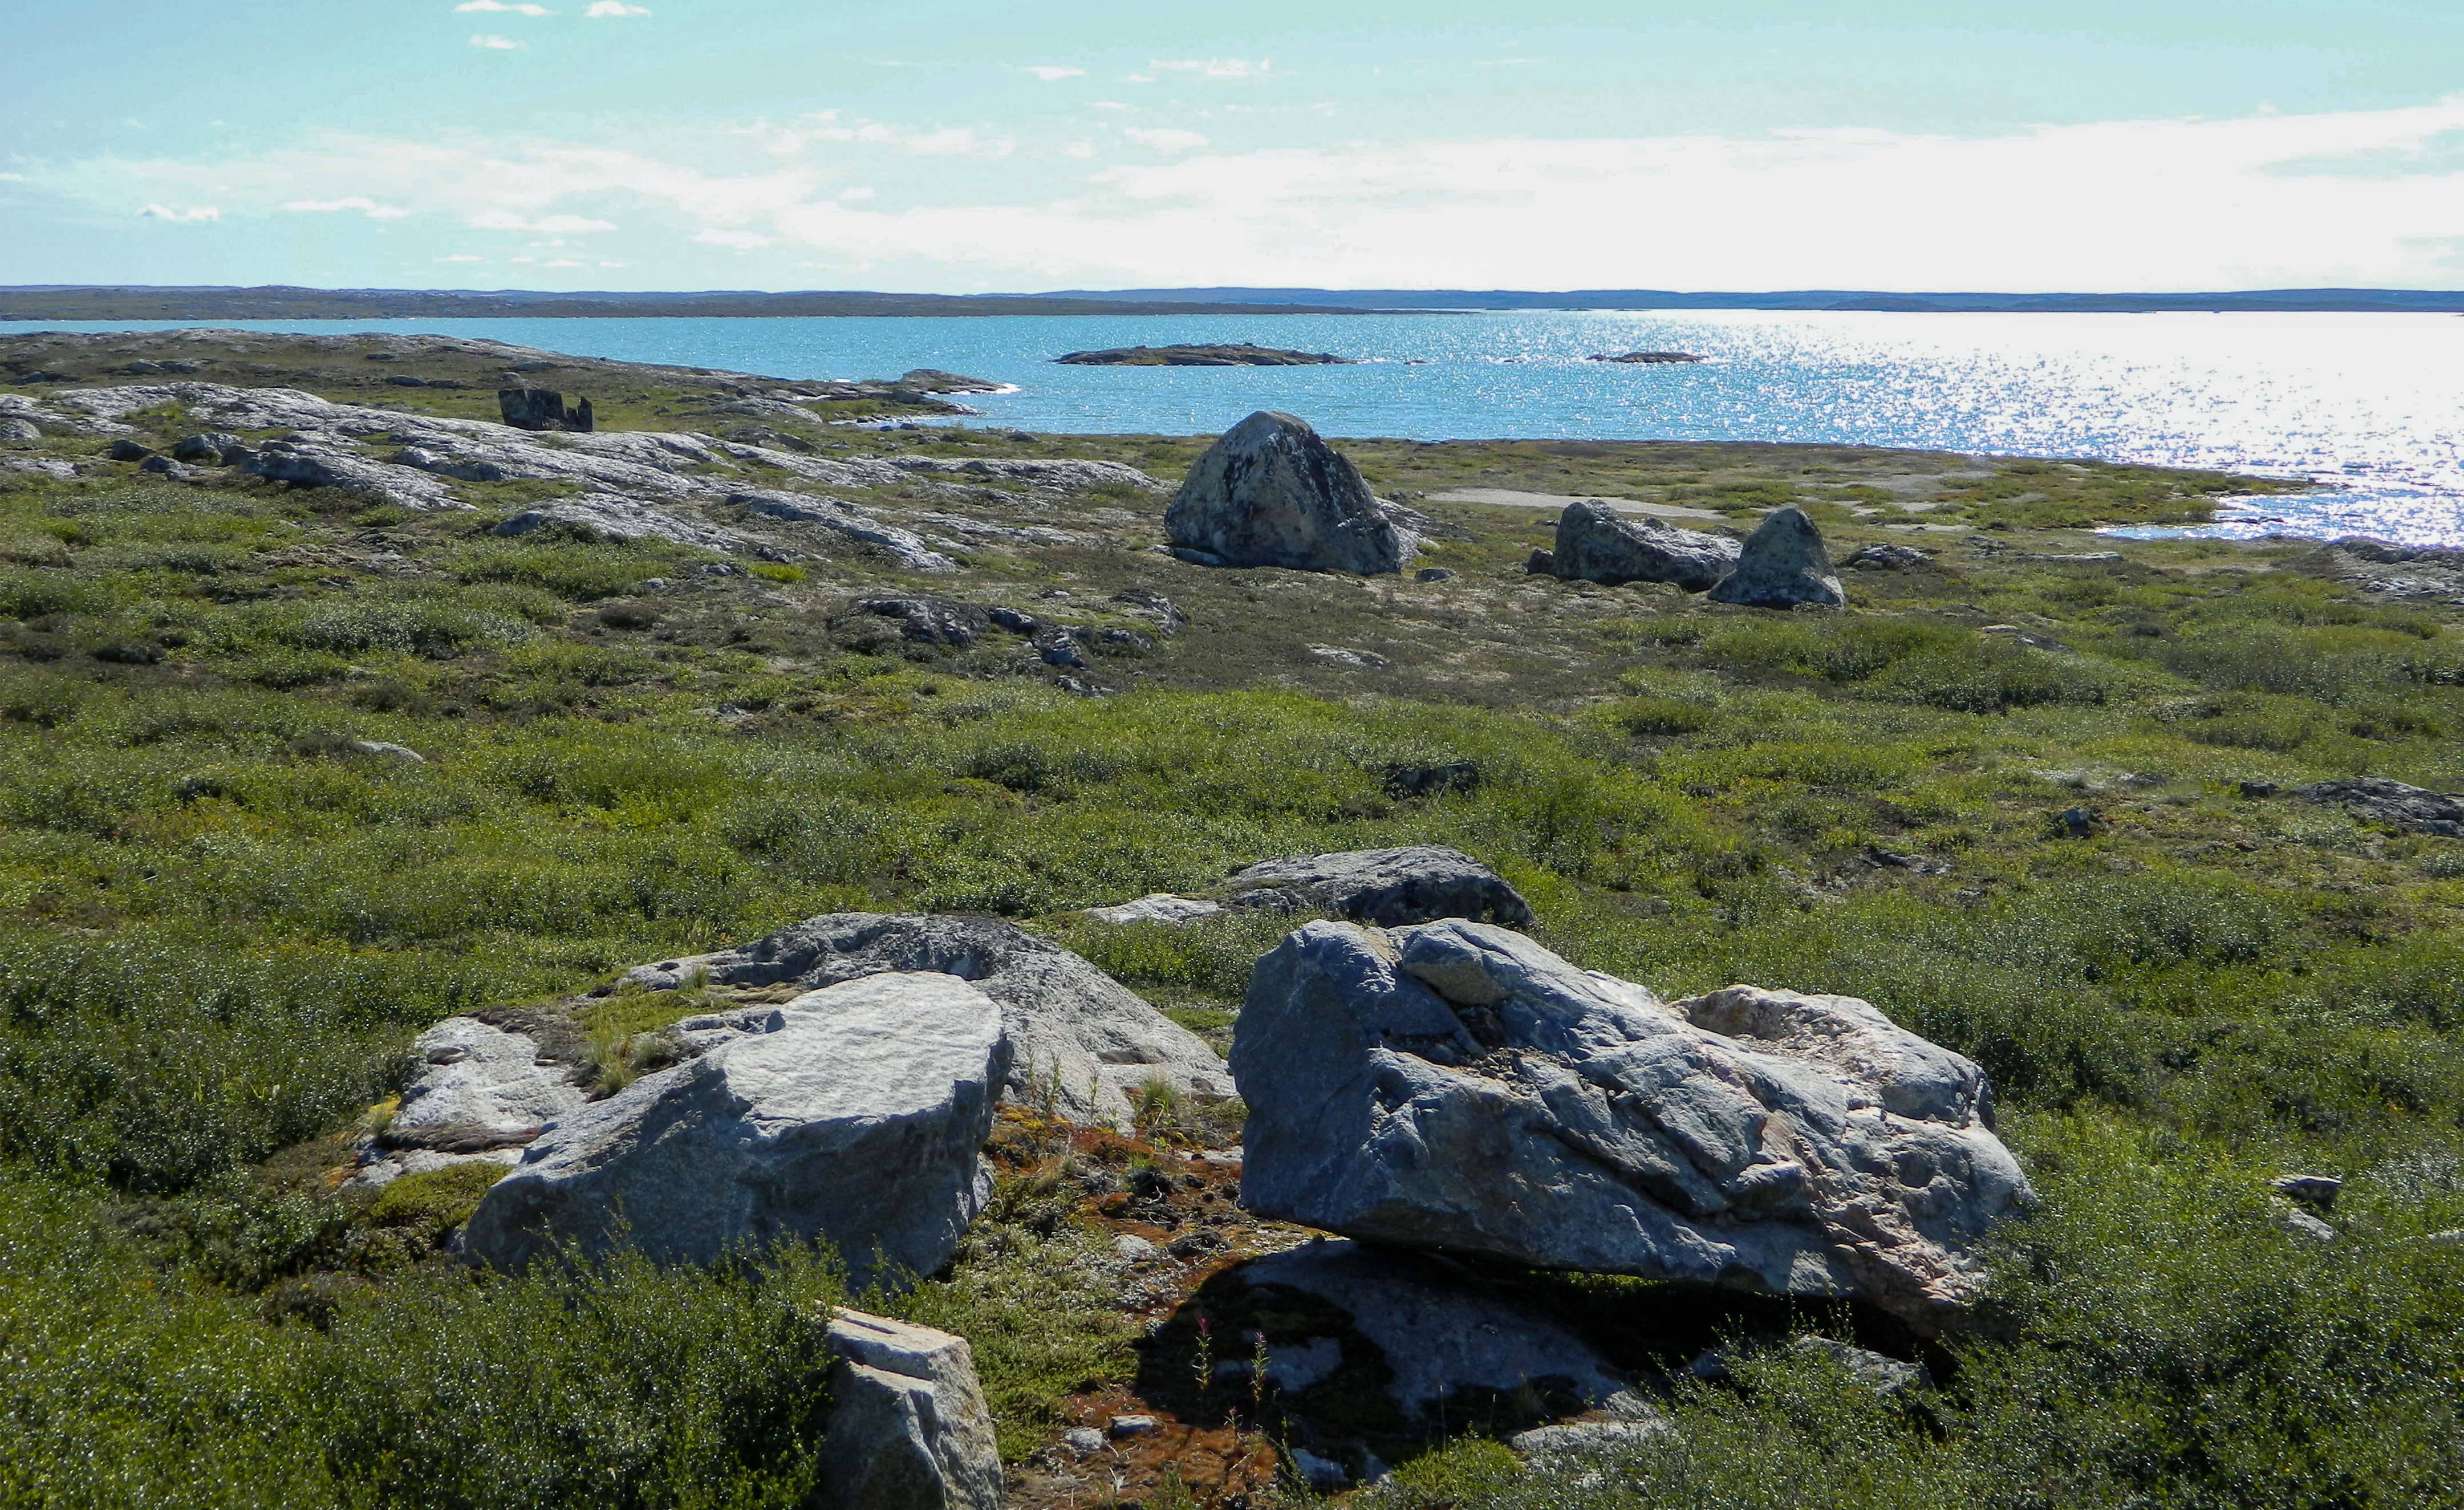 Boulders on a field by a lake in the remote NWT